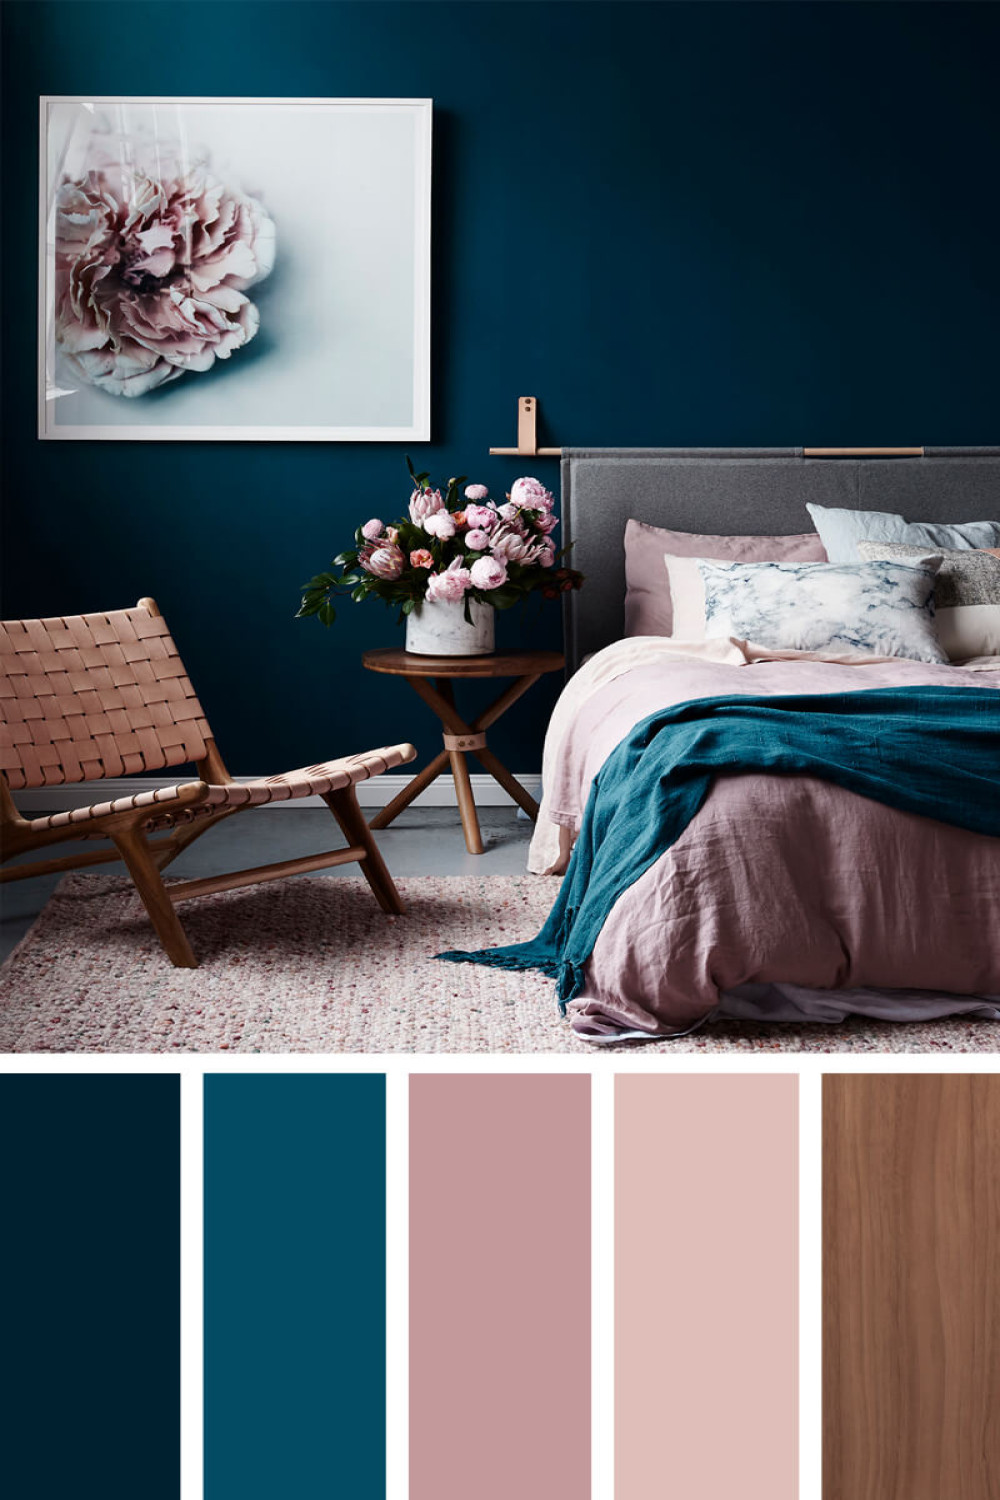 Best Bedroom Color Scheme Ideas and Designs for